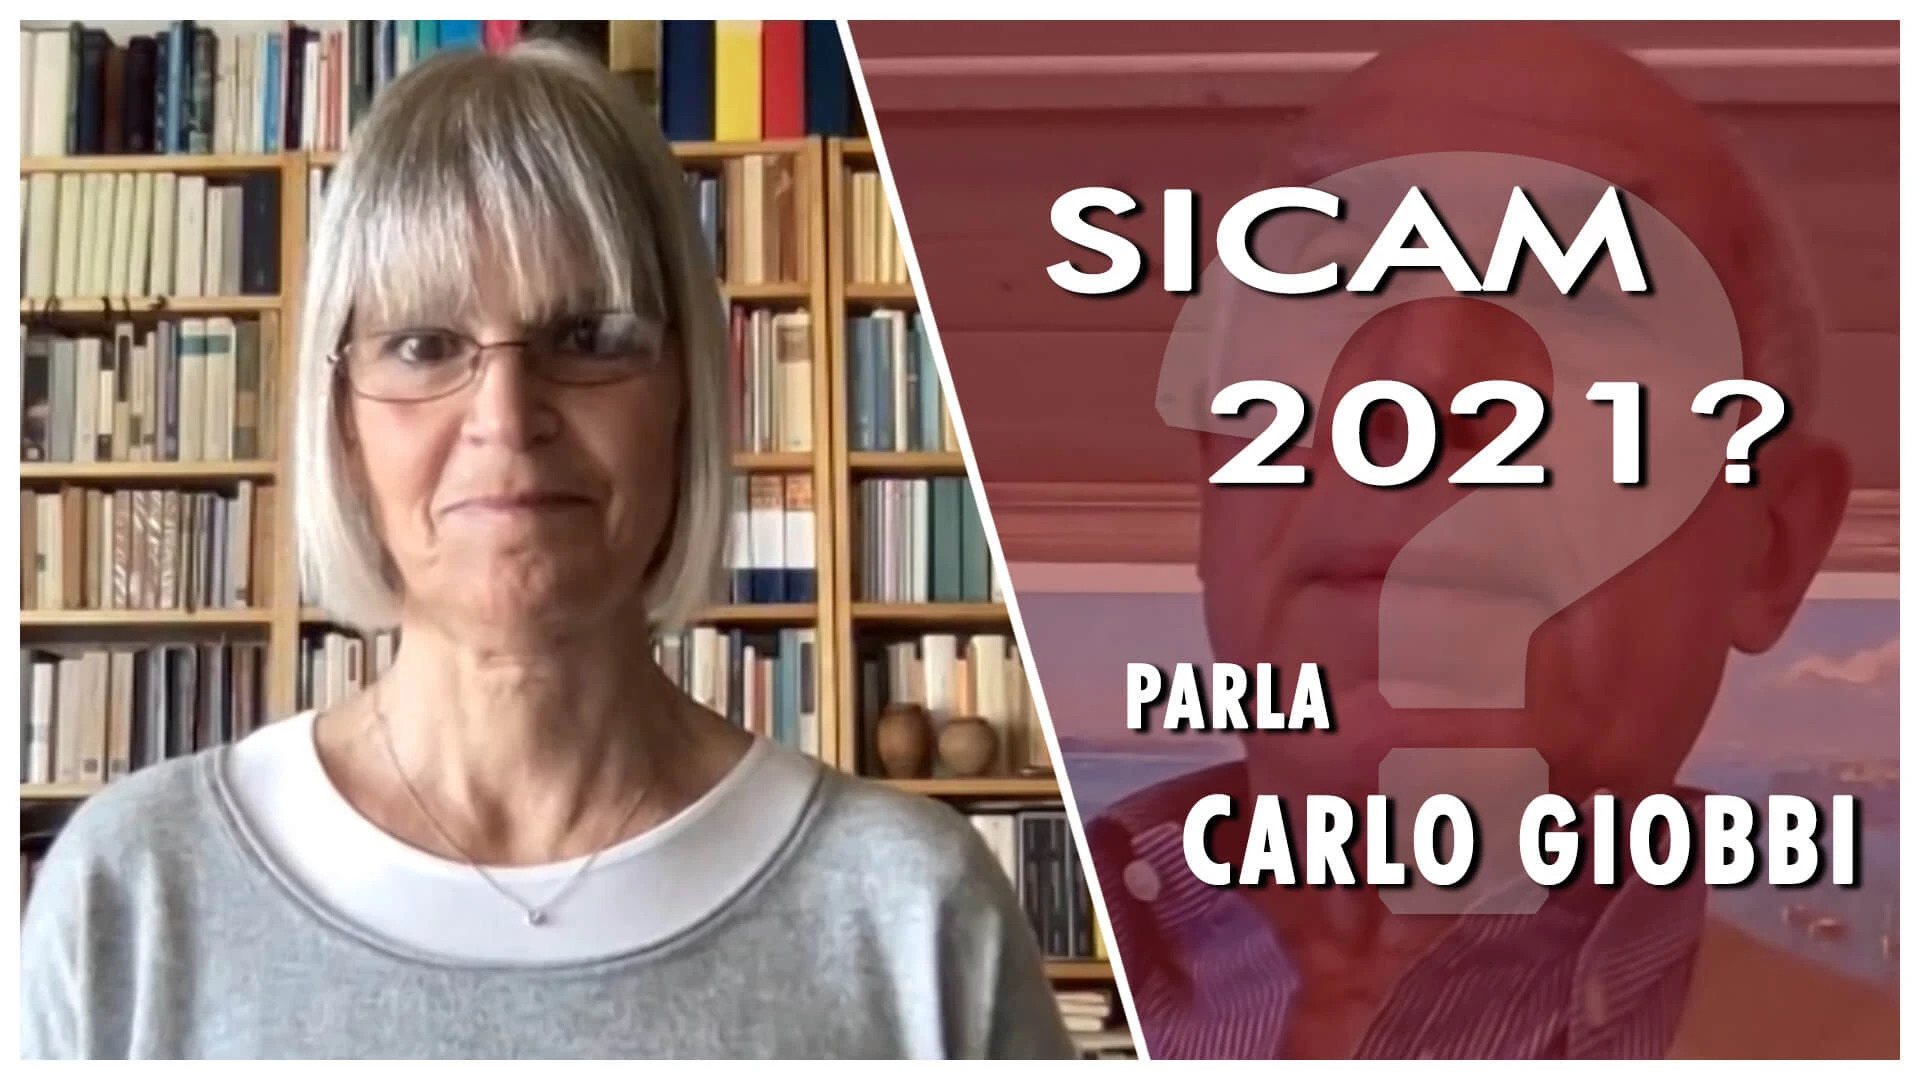 Sicam 2021 in Pordenone: where do we stand with the trade fair in attendance?